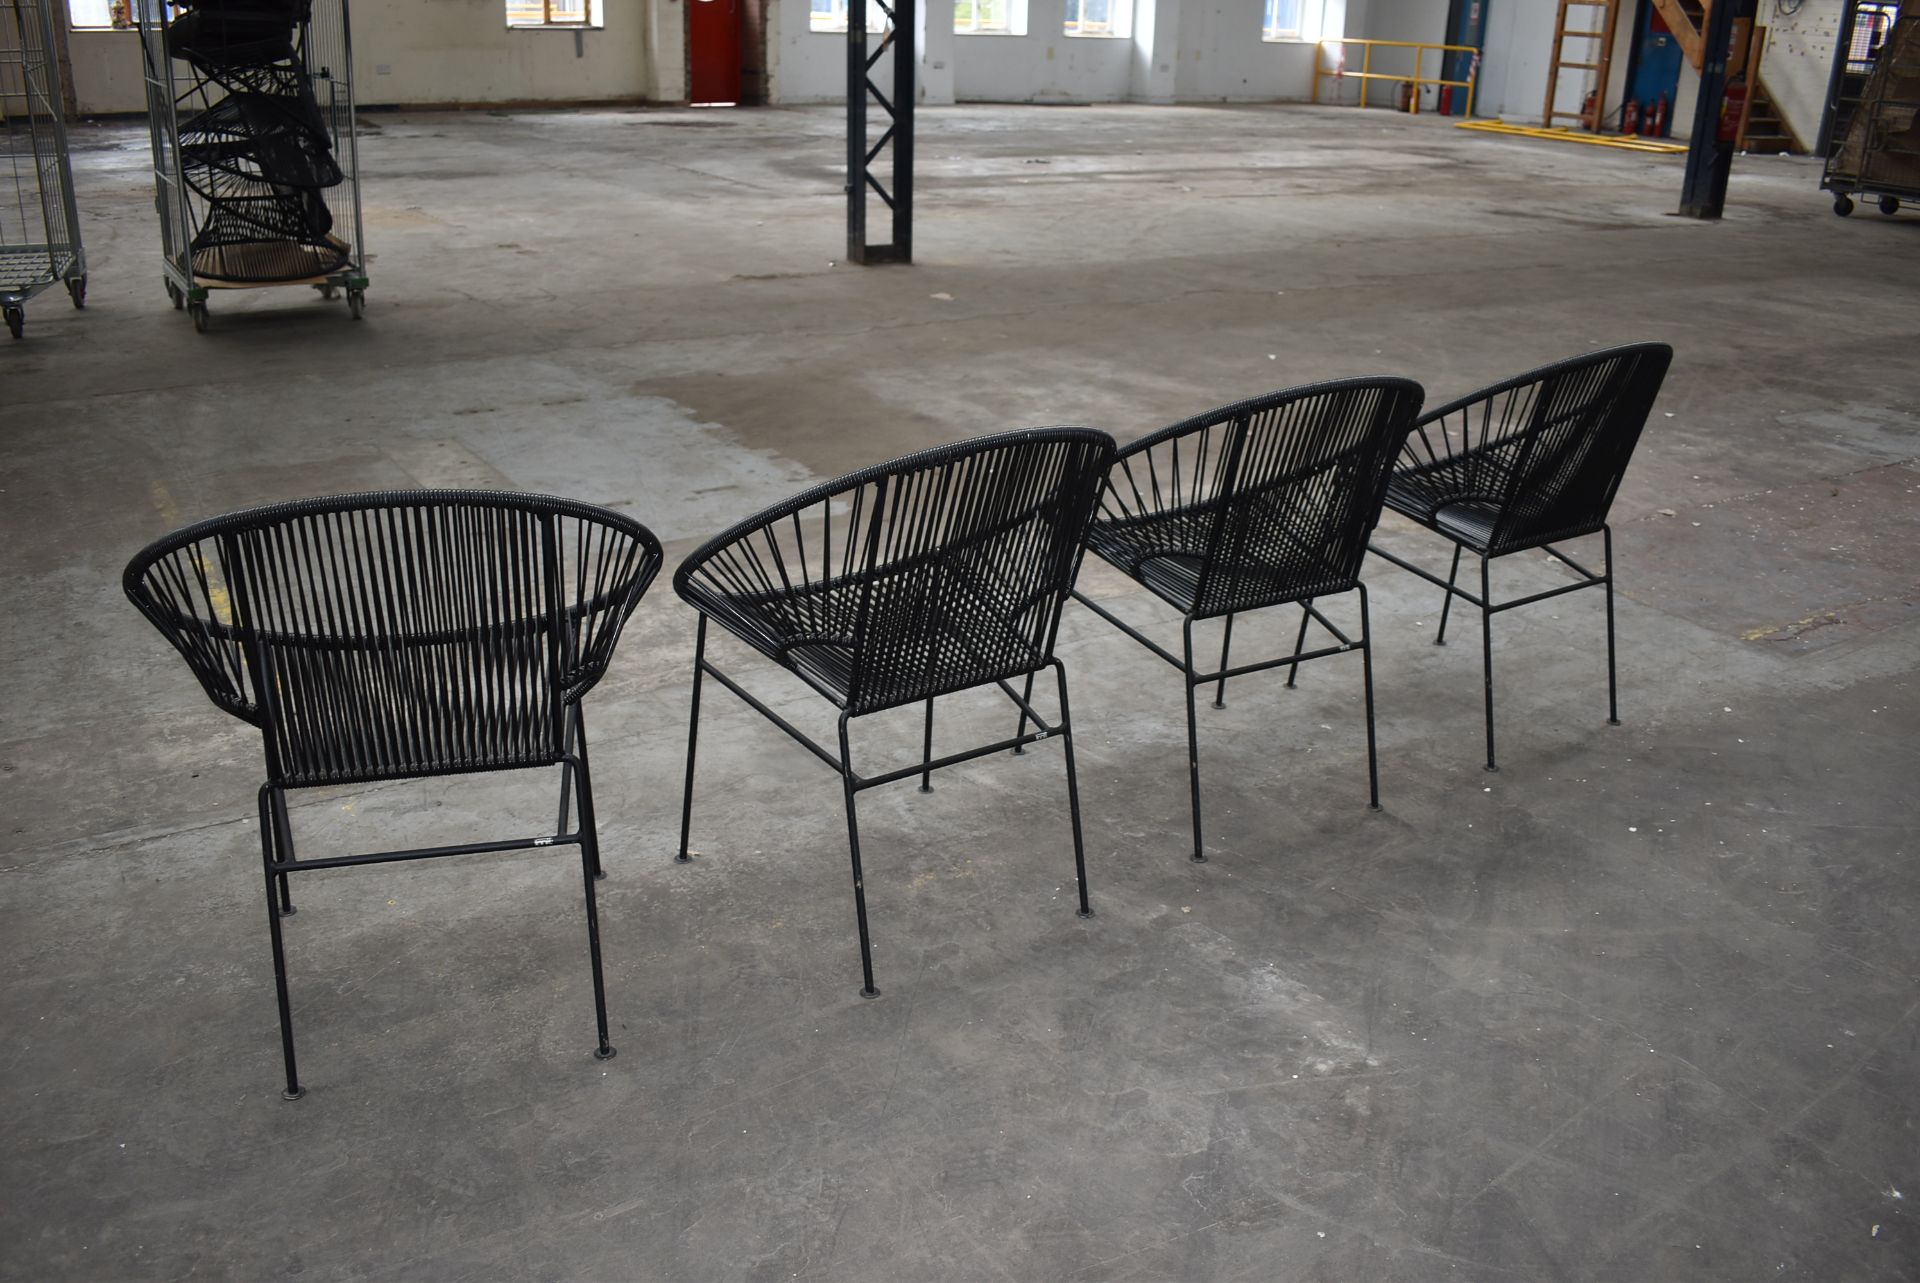 4 x Innit Designer Chairs - Acapulco Style Chairs in Black Suitable For Indoor or Outdoor Use - - Image 5 of 9